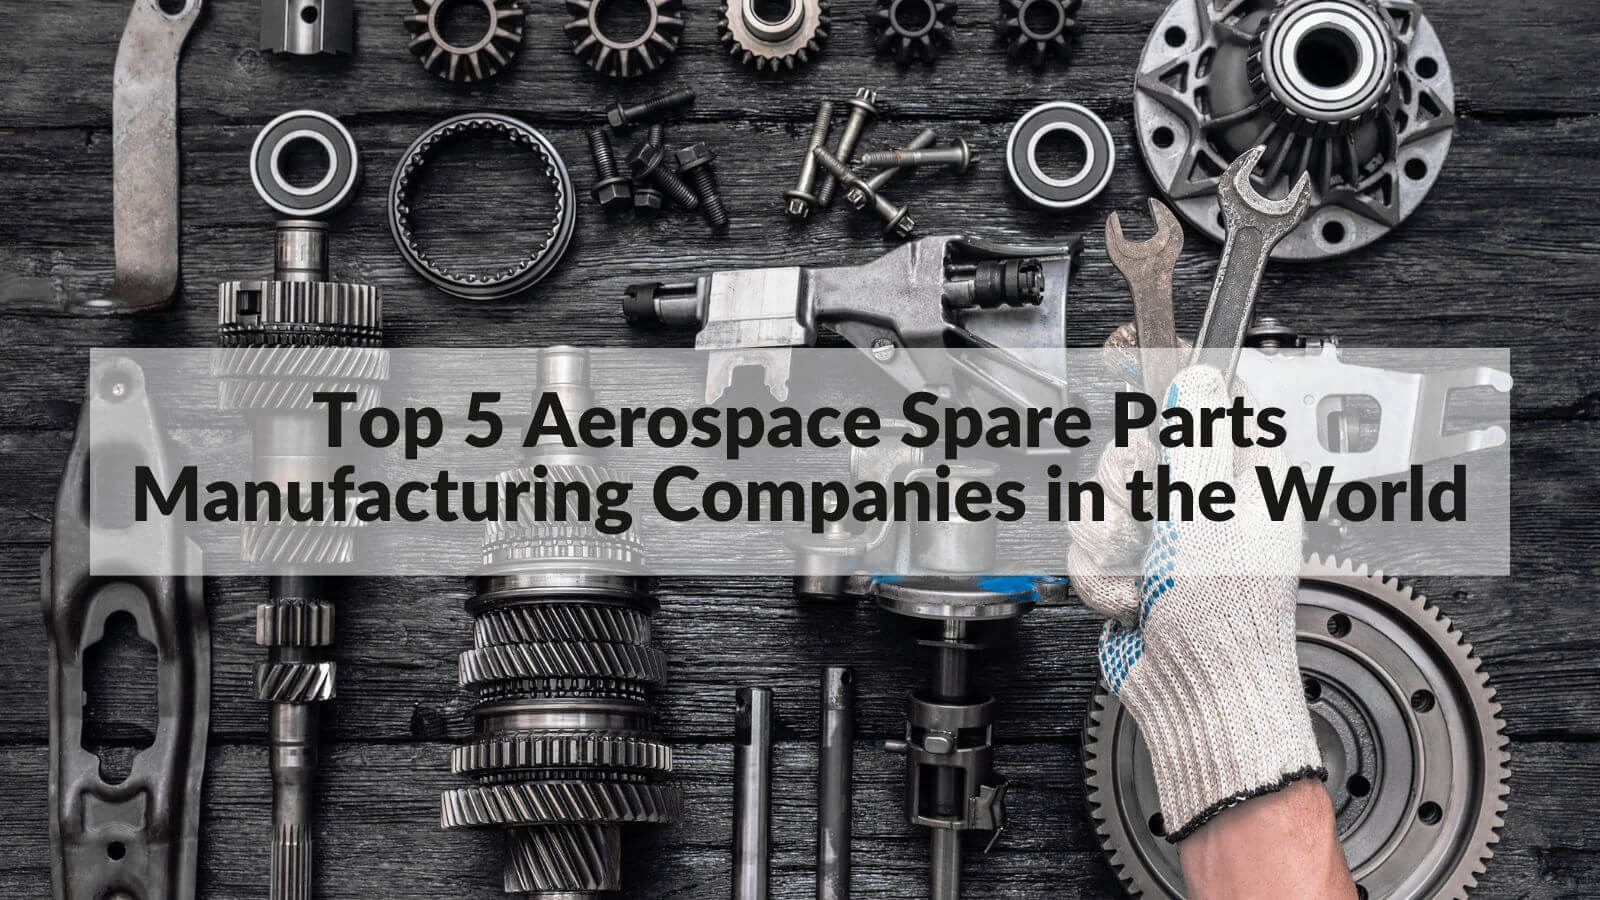 Top 5 Aerospace Spare Parts Manufacturing Companies in the World 2022